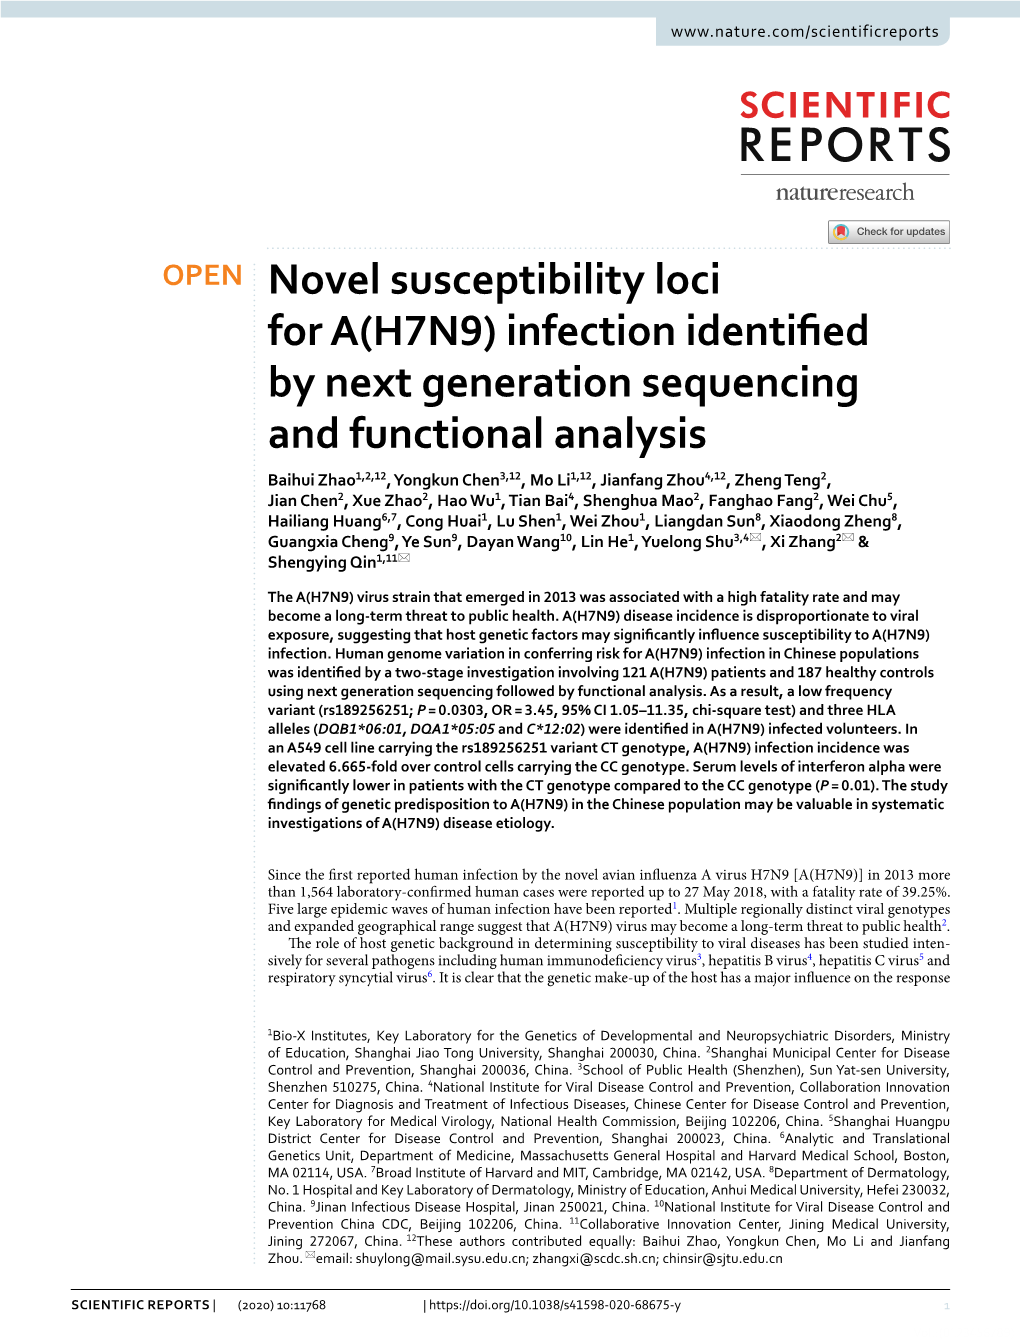 Novel Susceptibility Loci for A(H7N9) Infection Identified by Next